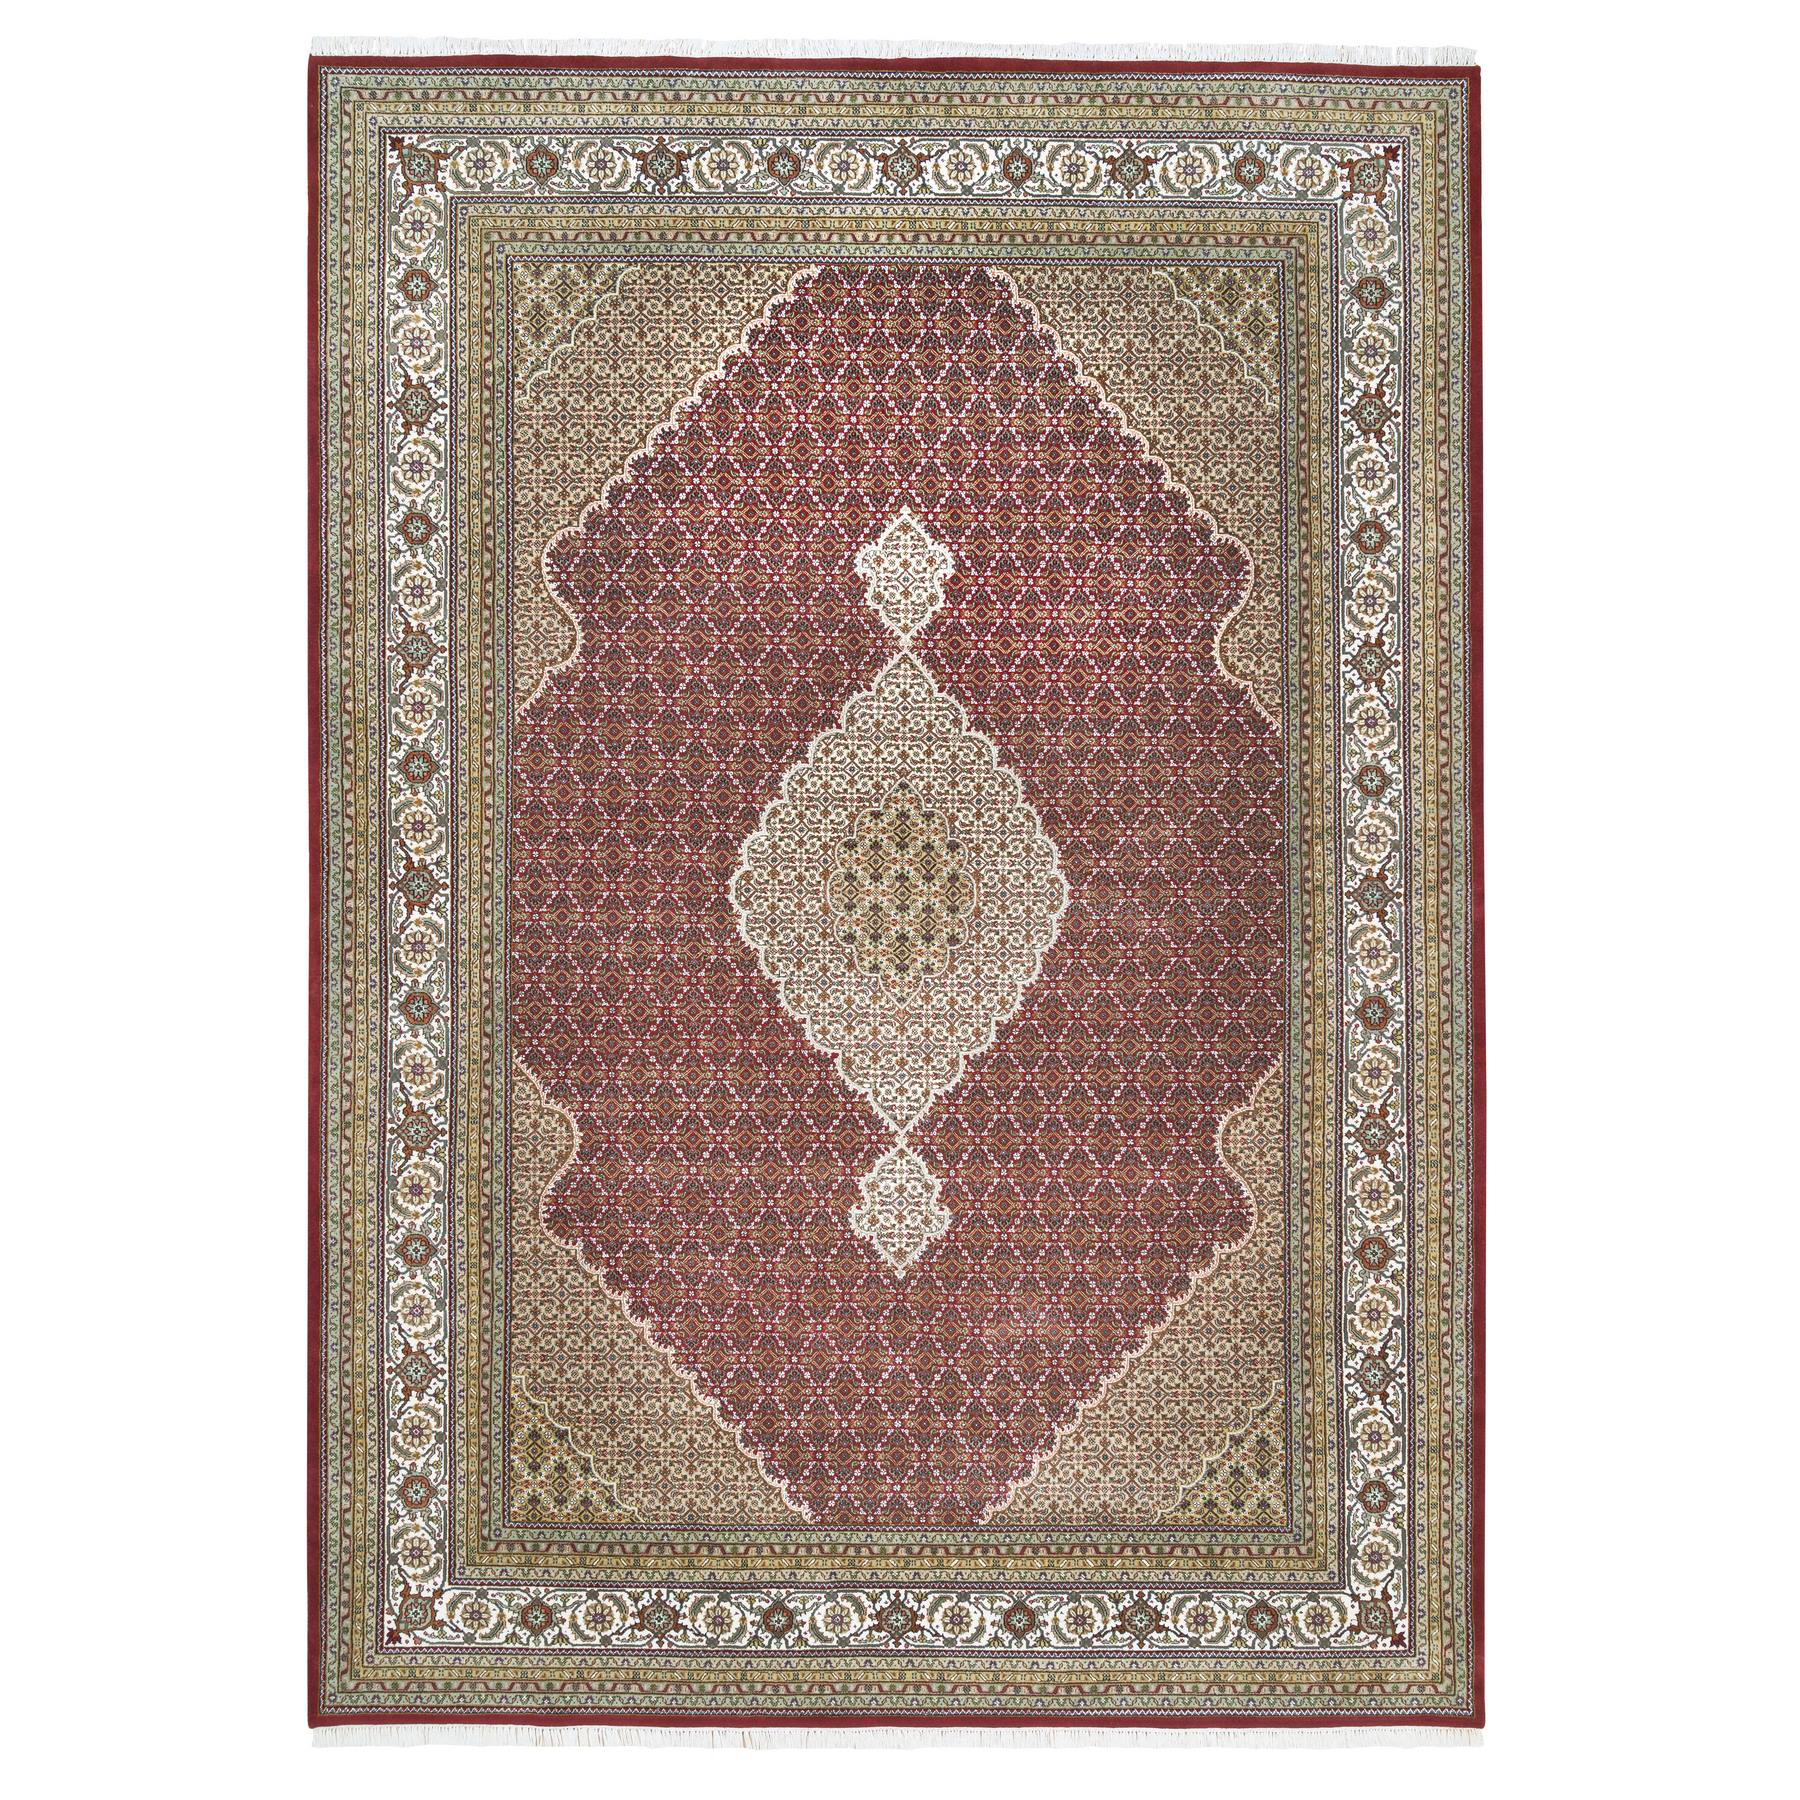 Pirniakan Collection Hand Knotted Red Rug No: 1125256